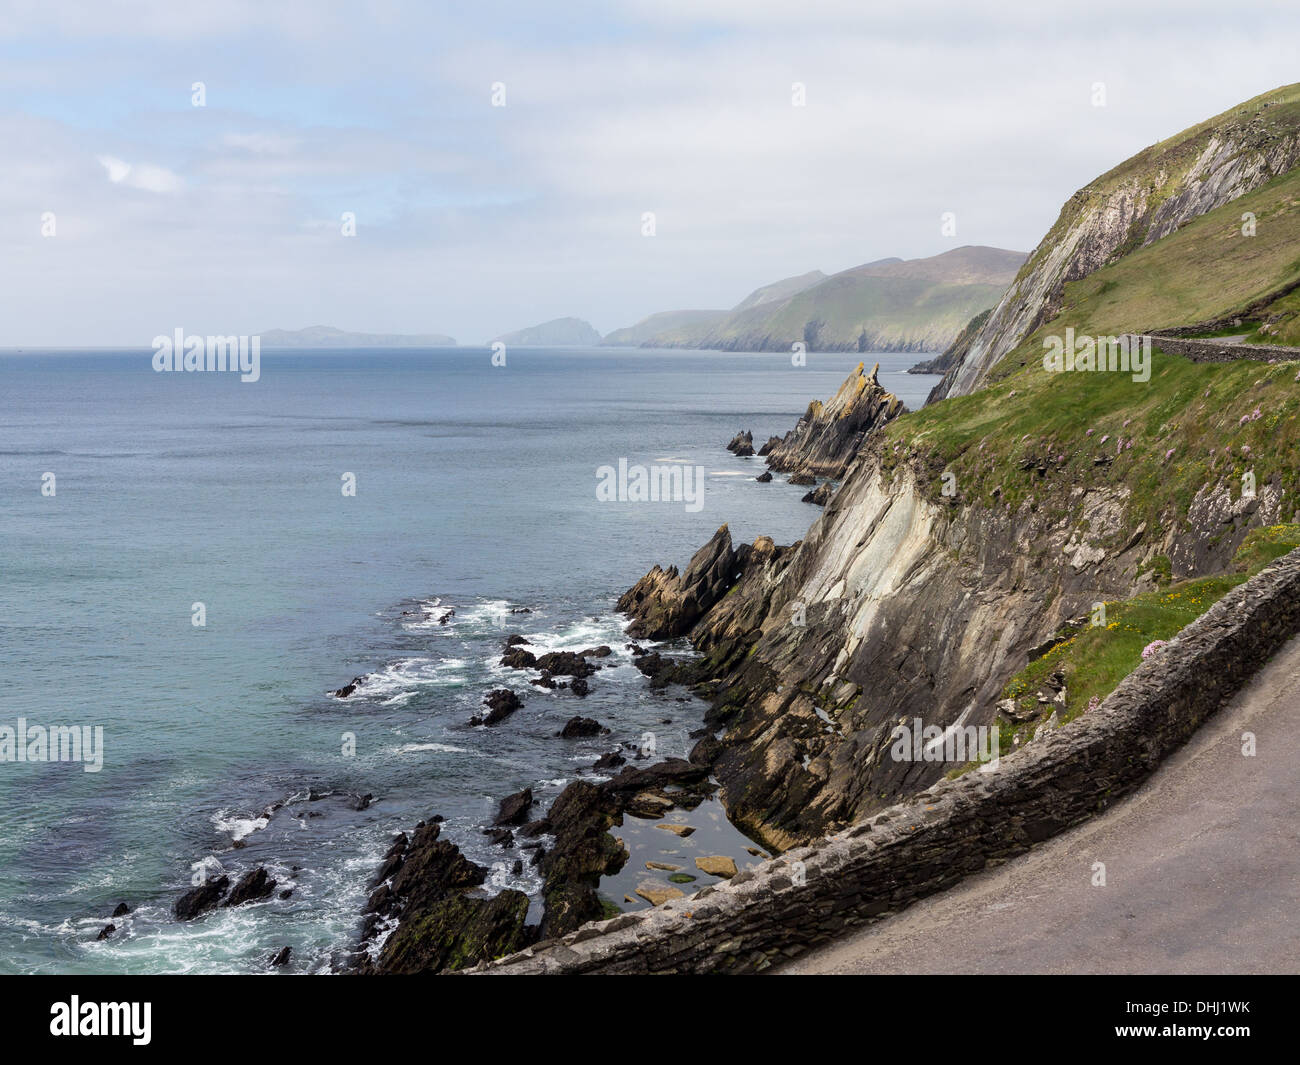 Dingle Peninsula, view along the coastline of the western point of County Kerry near Dingle in Ireland or Eire Stock Photo